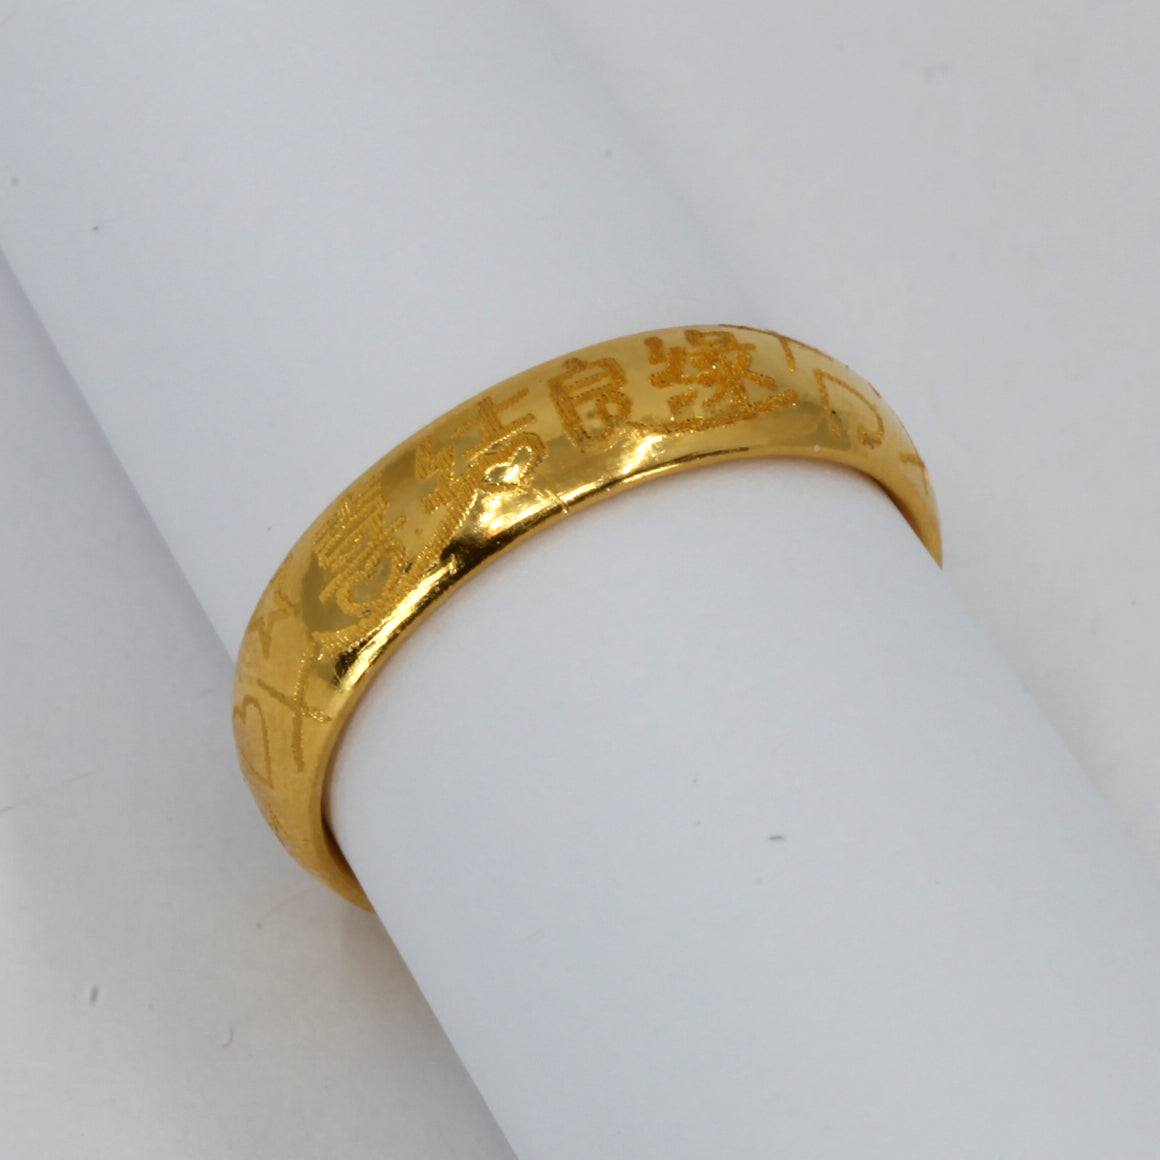 Buy 7 Grams 99.9% Pure 24k Gold Ring Online in India - Etsy